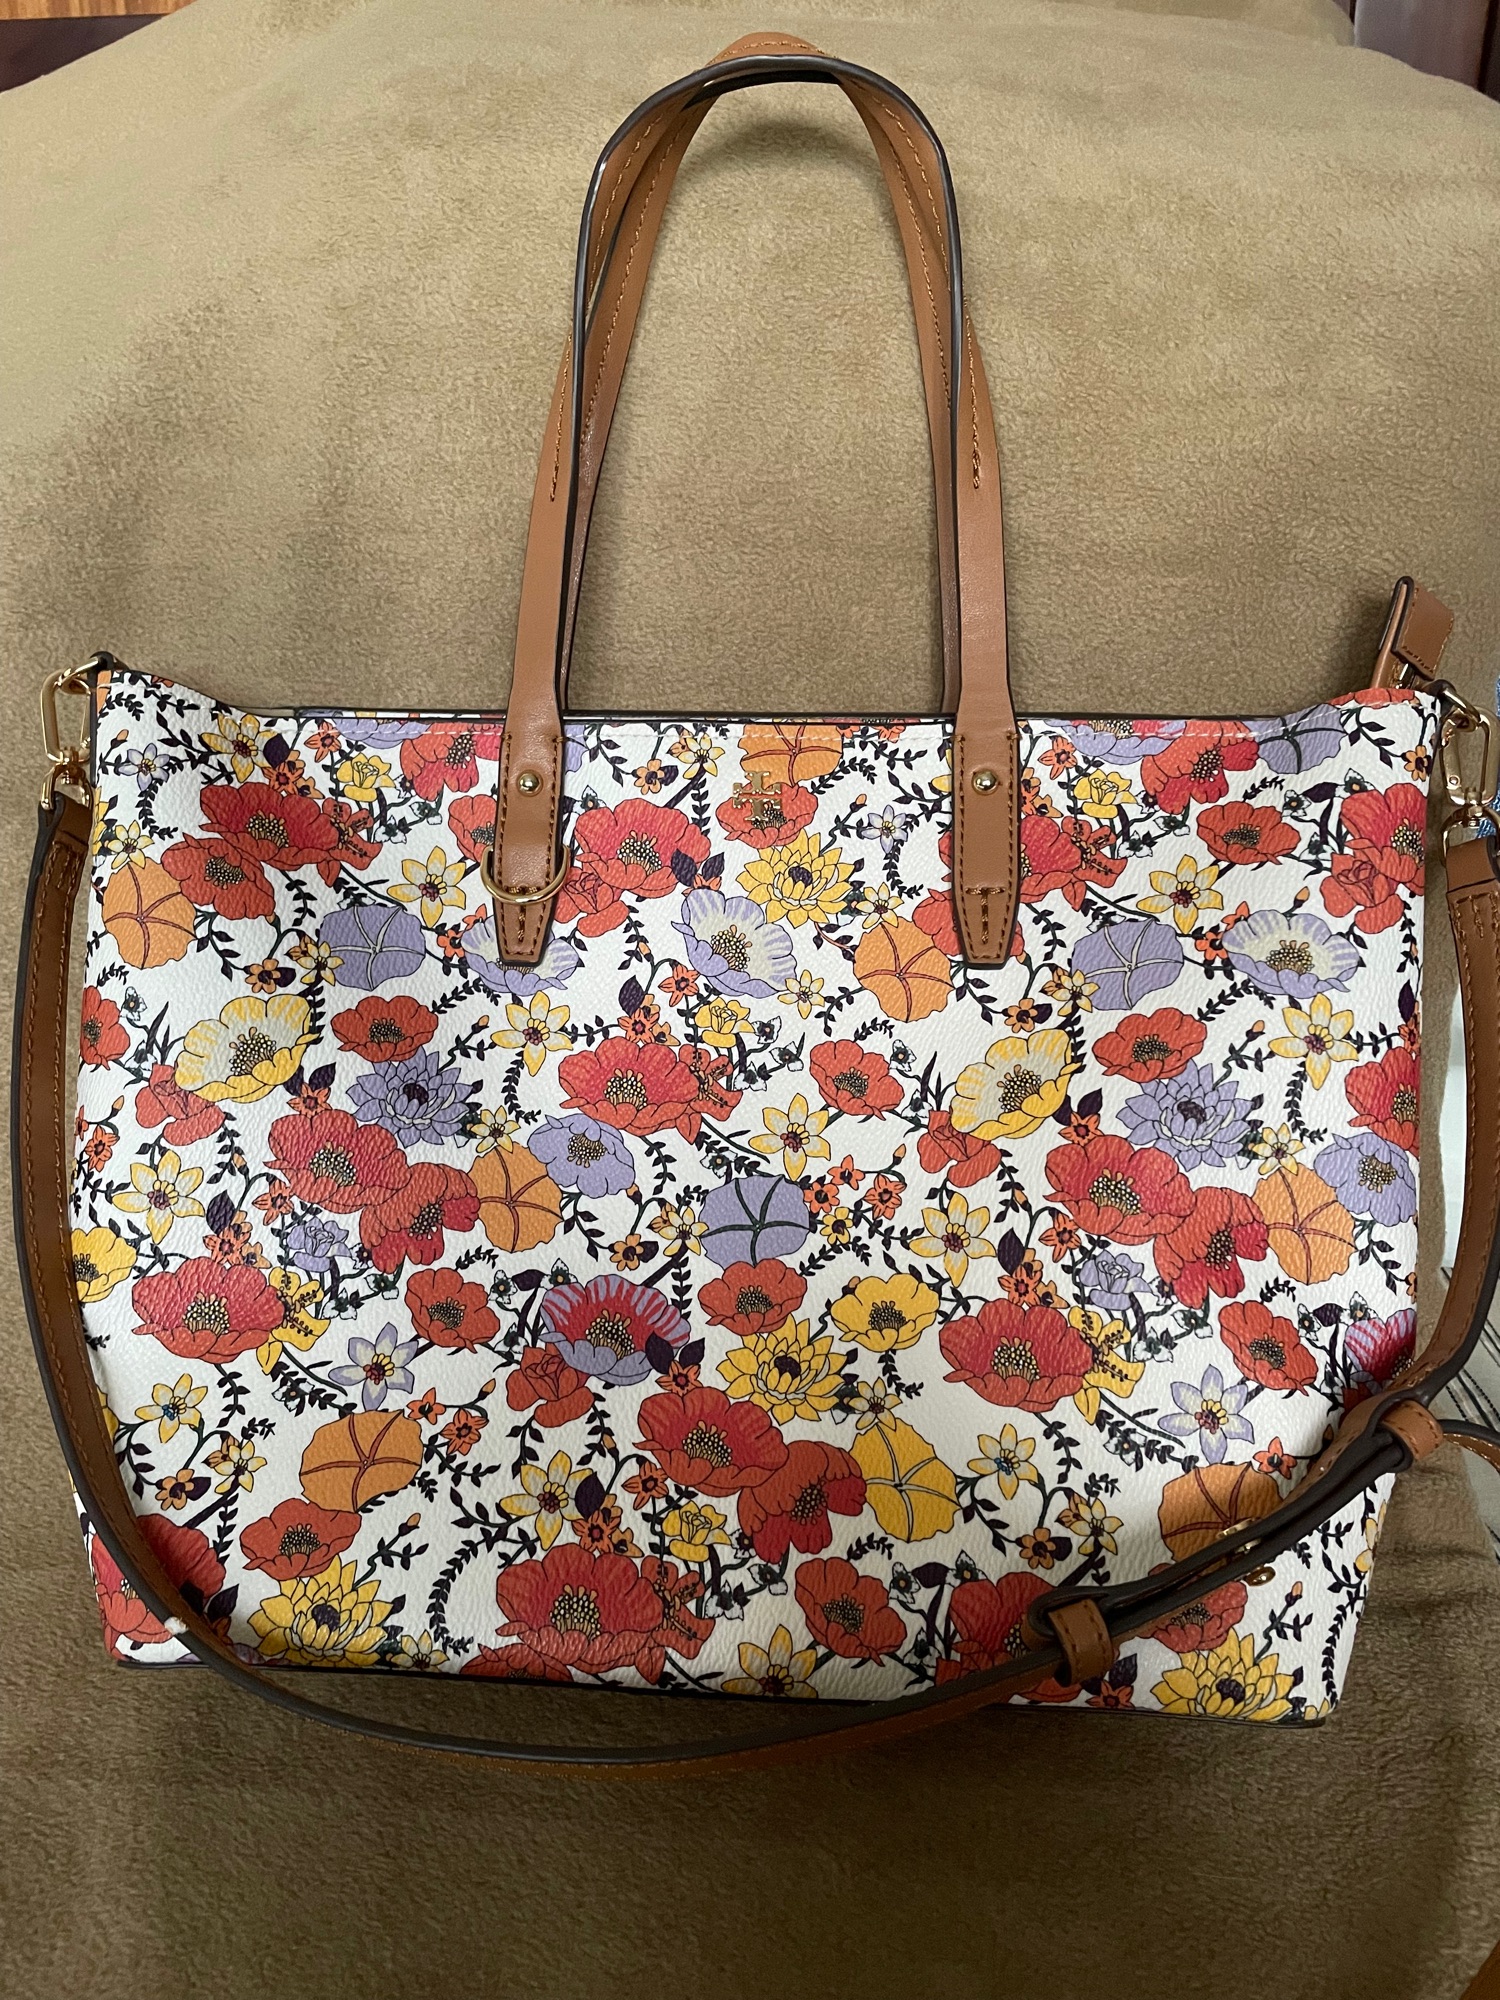 Buy Tory burch bags Top Products at Best Prices online 